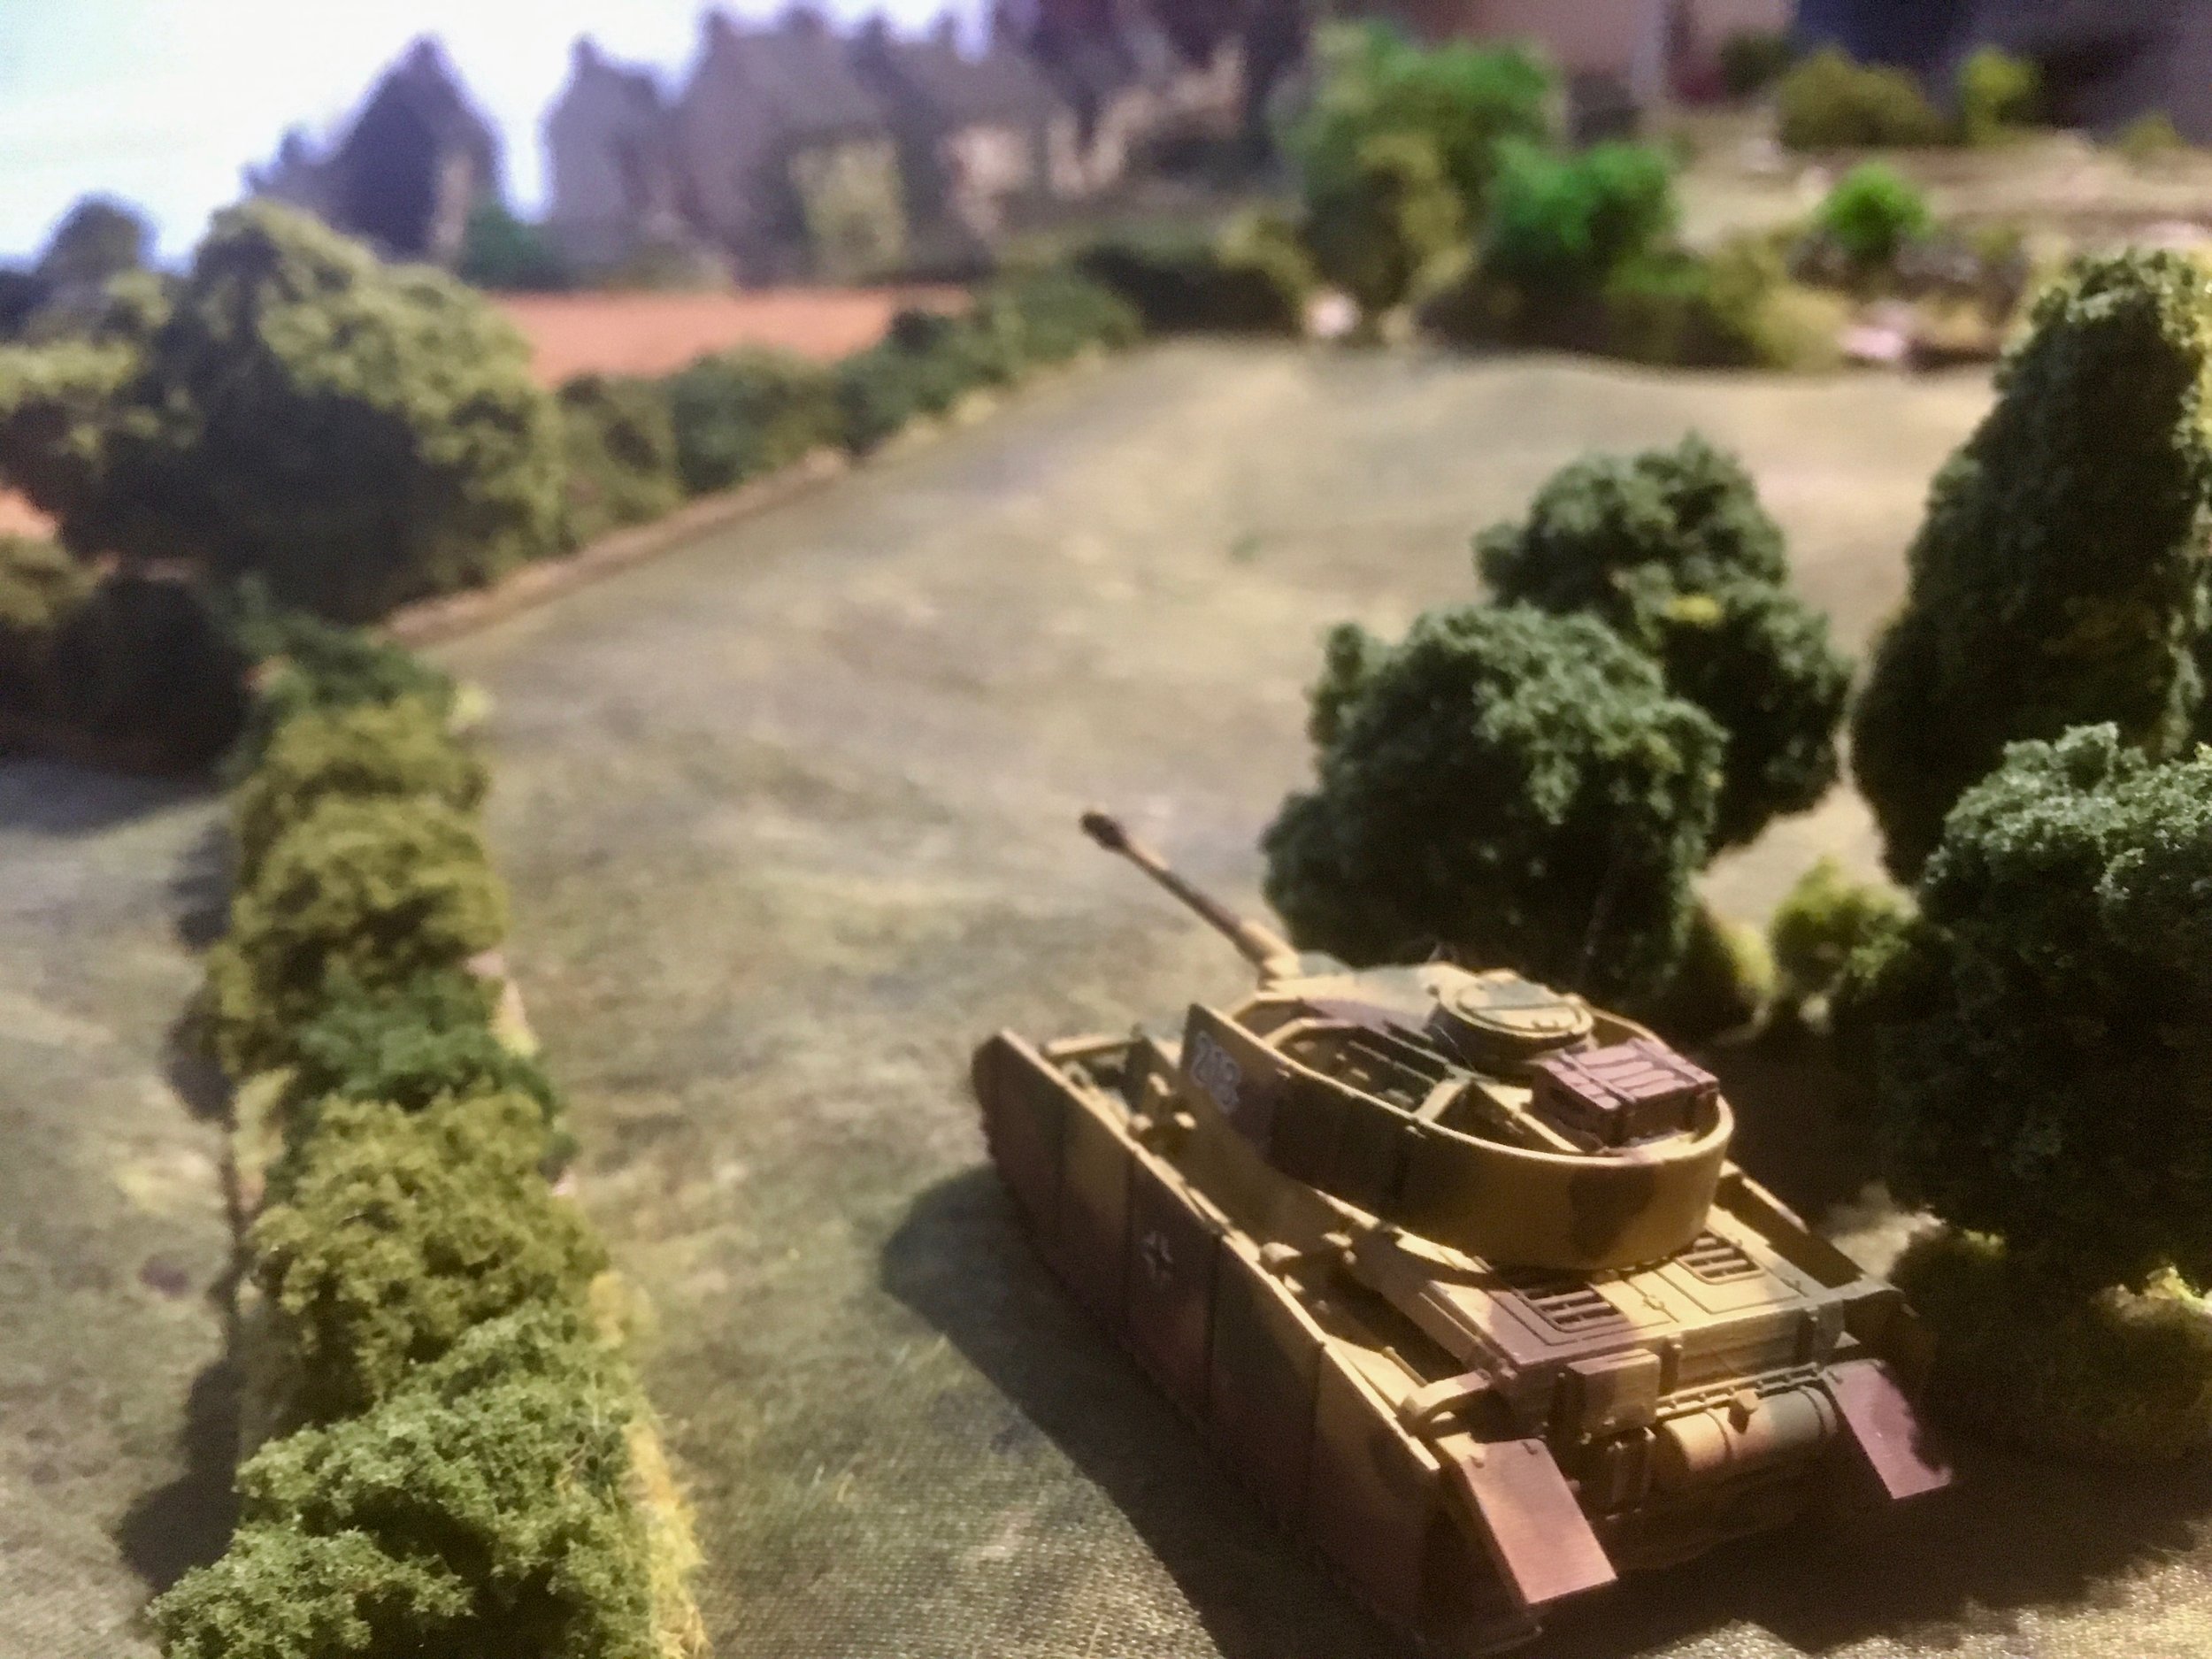 Whilst another Panzer IV fired at the newly arrived British armour...